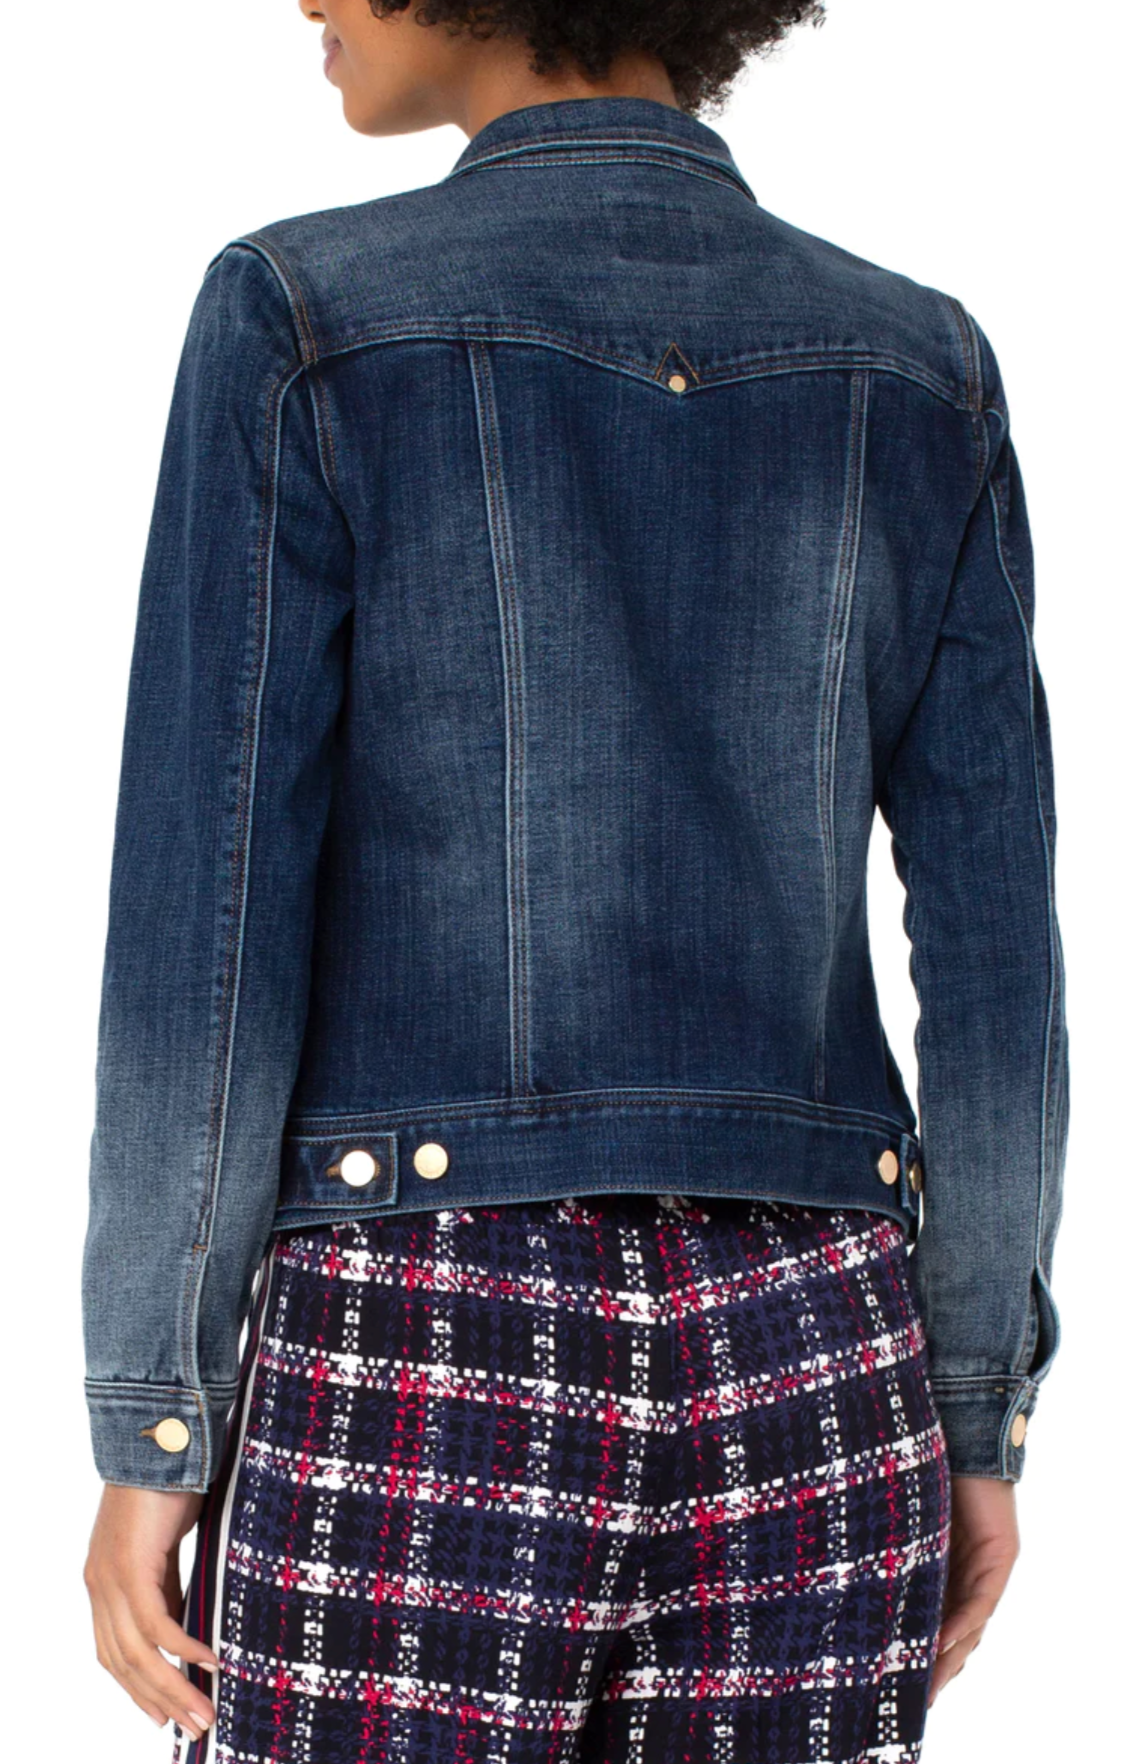 Classic Jean Jacket - The French Shoppe